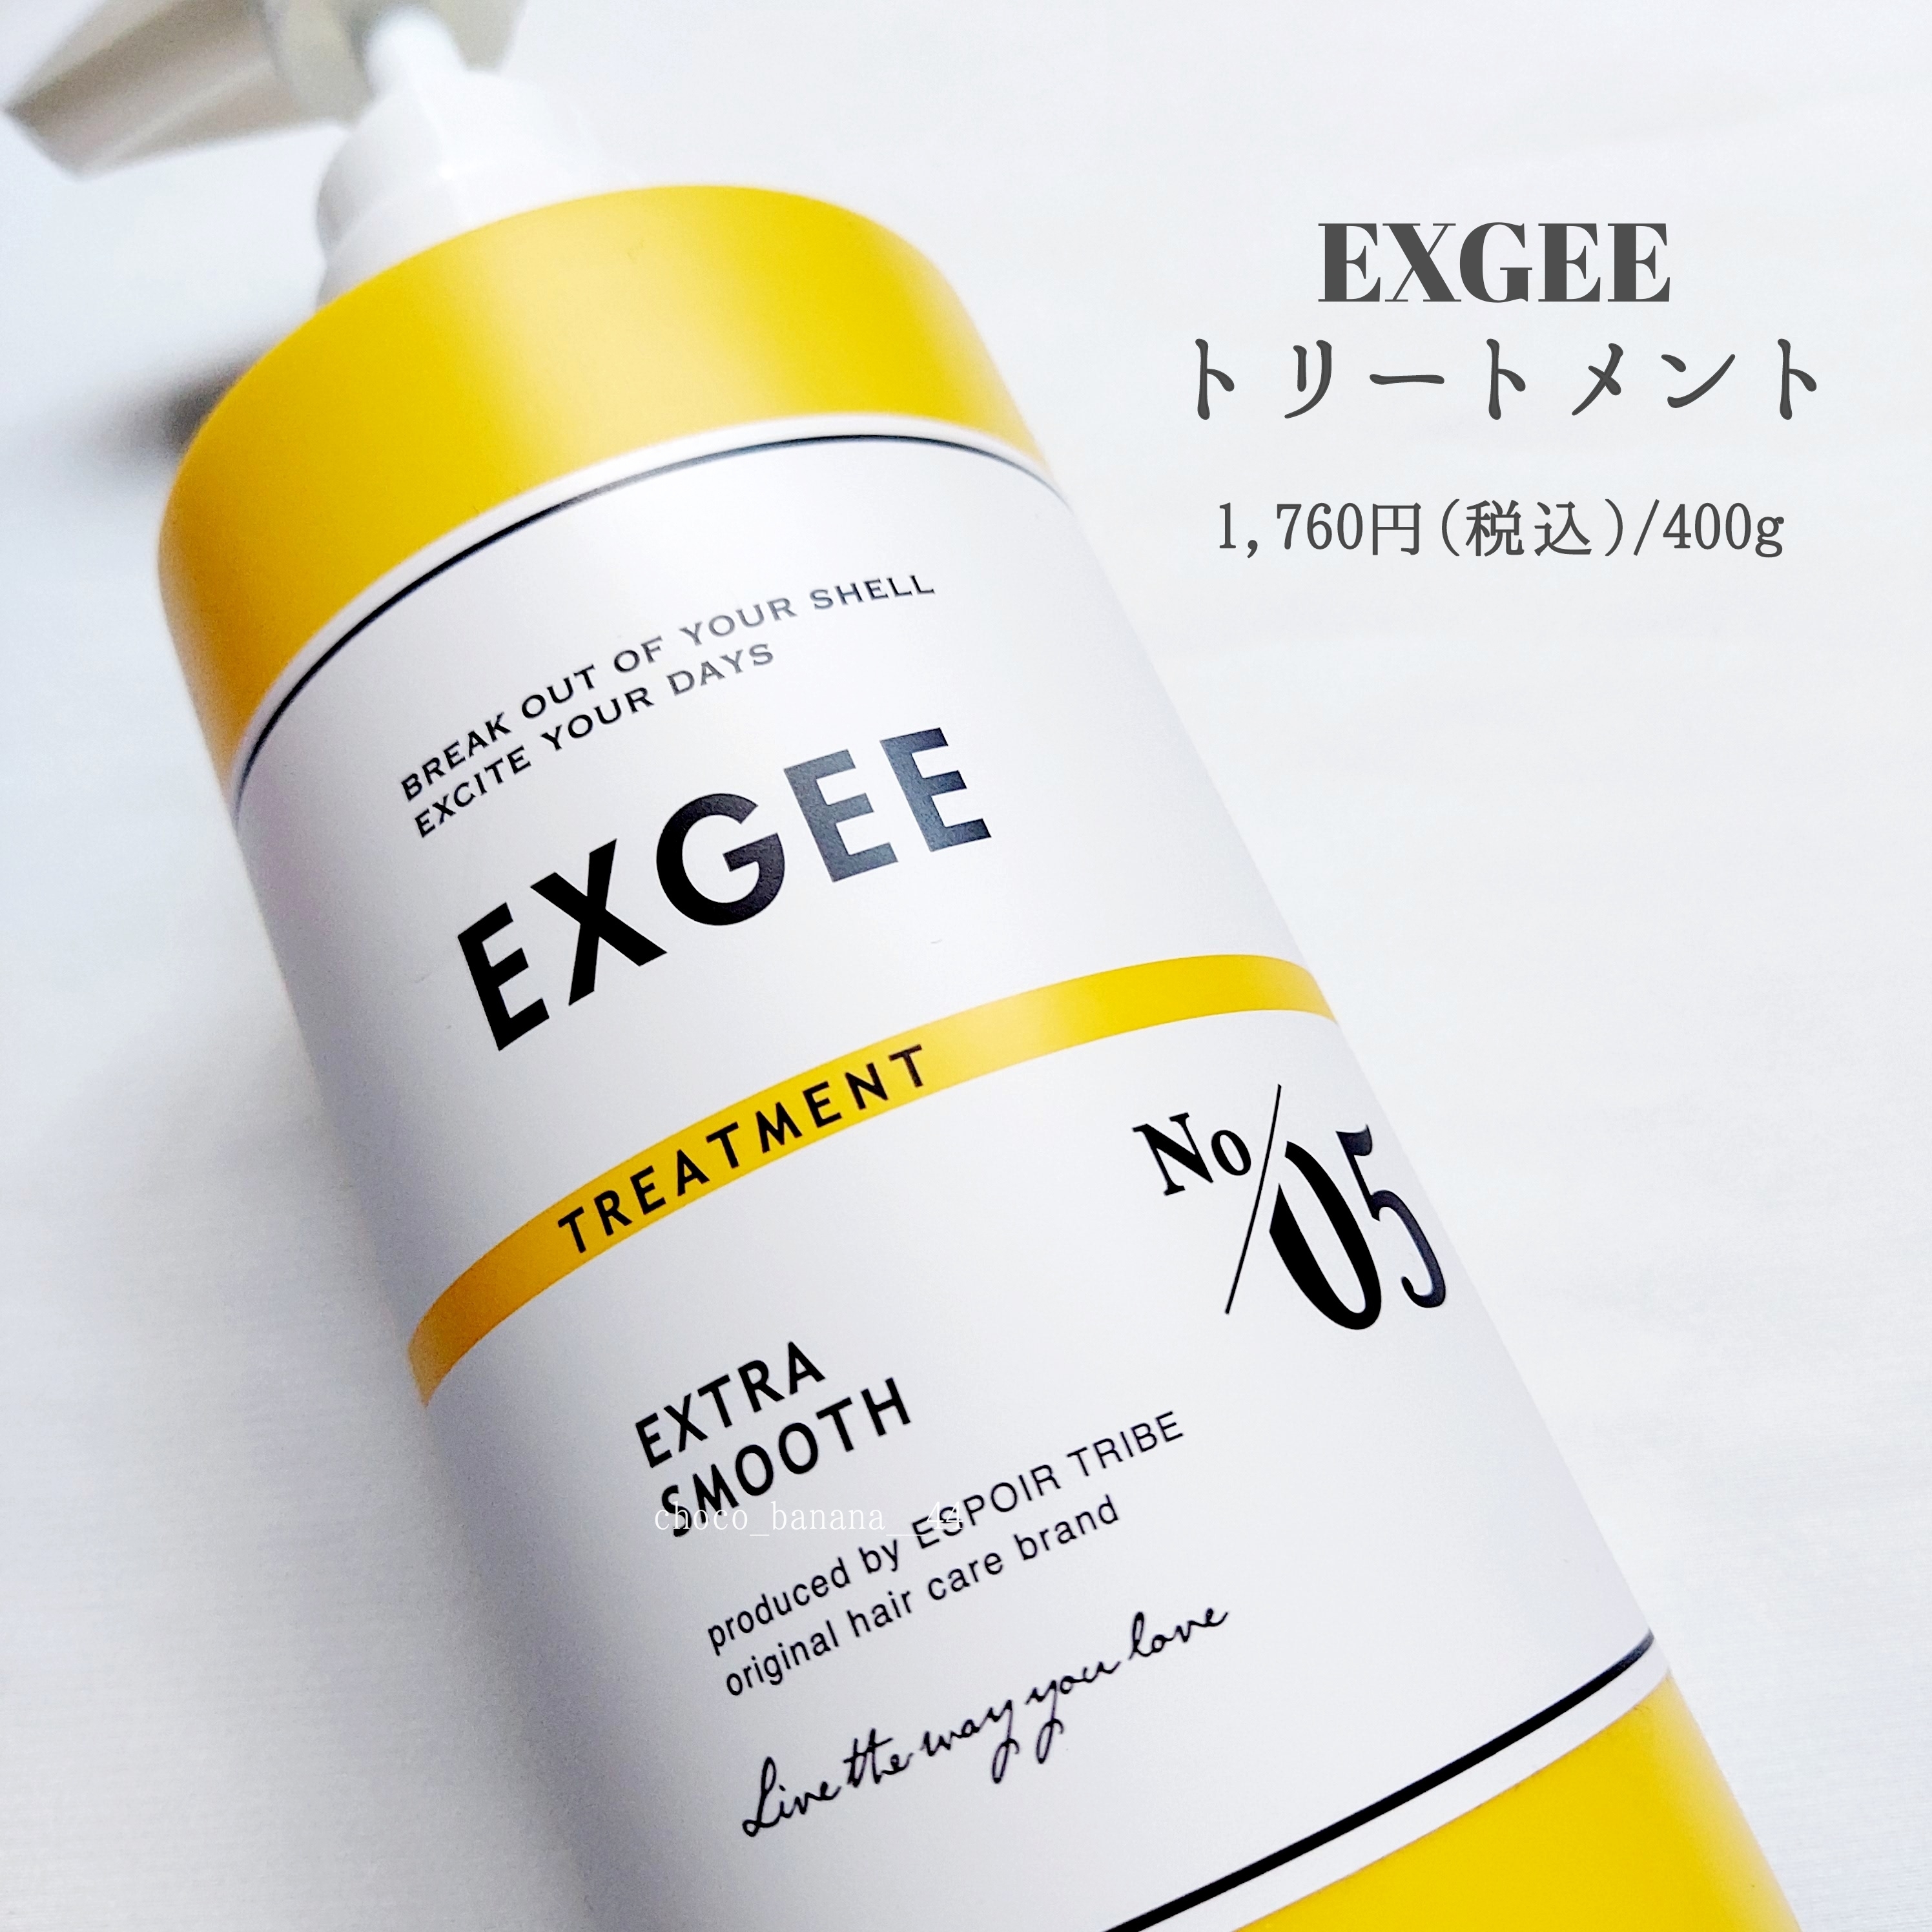 EXGEE
EXGEEシャンプー／EXGEEトリートメントを使ったししさんのクチコミ画像3